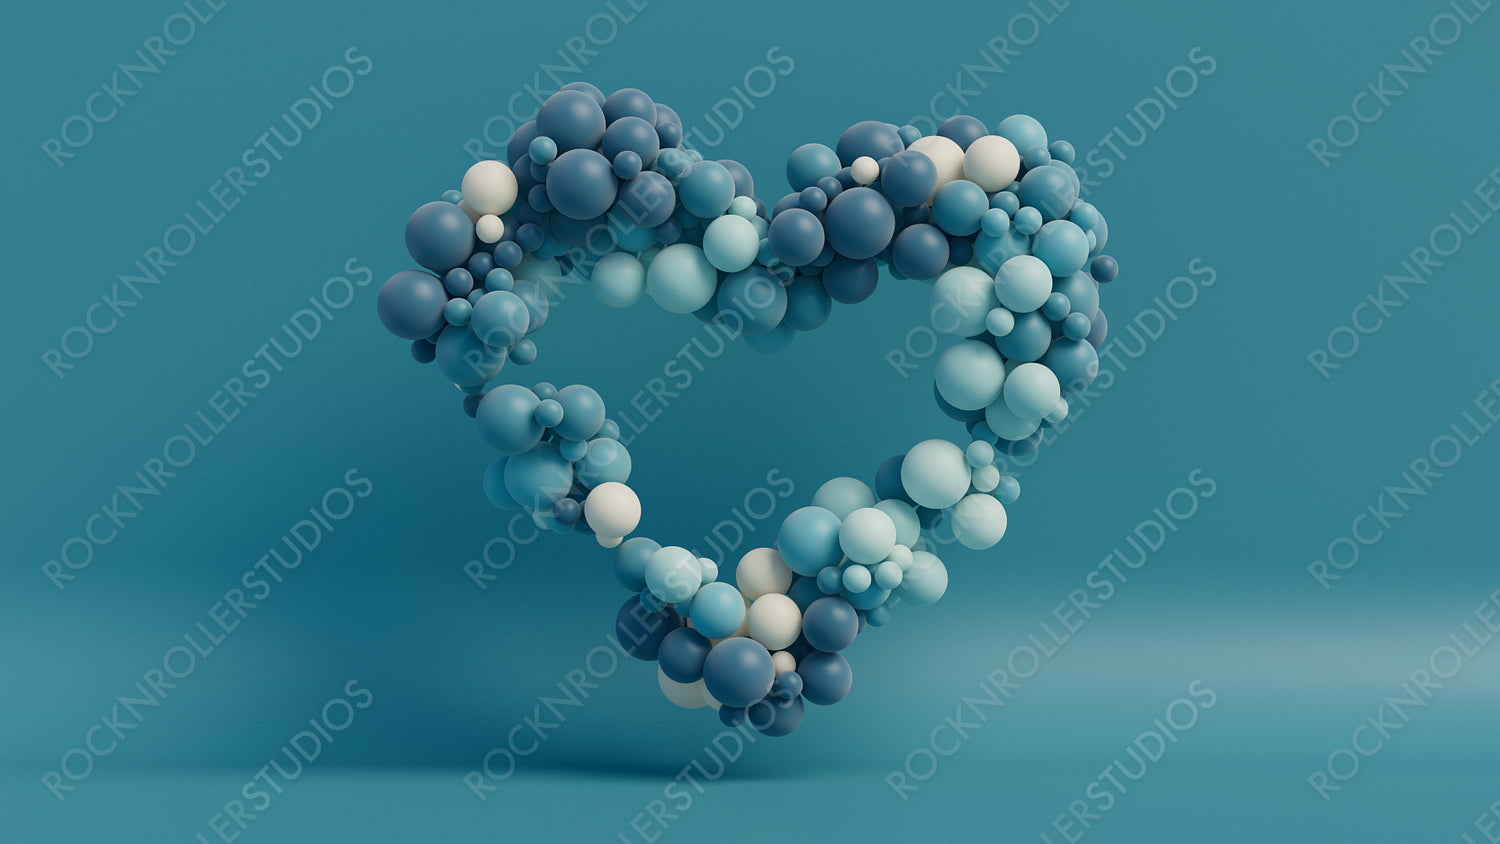 Multicolored Balloon Love Heart. Blue, Cyan and White Balloons arranged in a heart shape. 3D Render